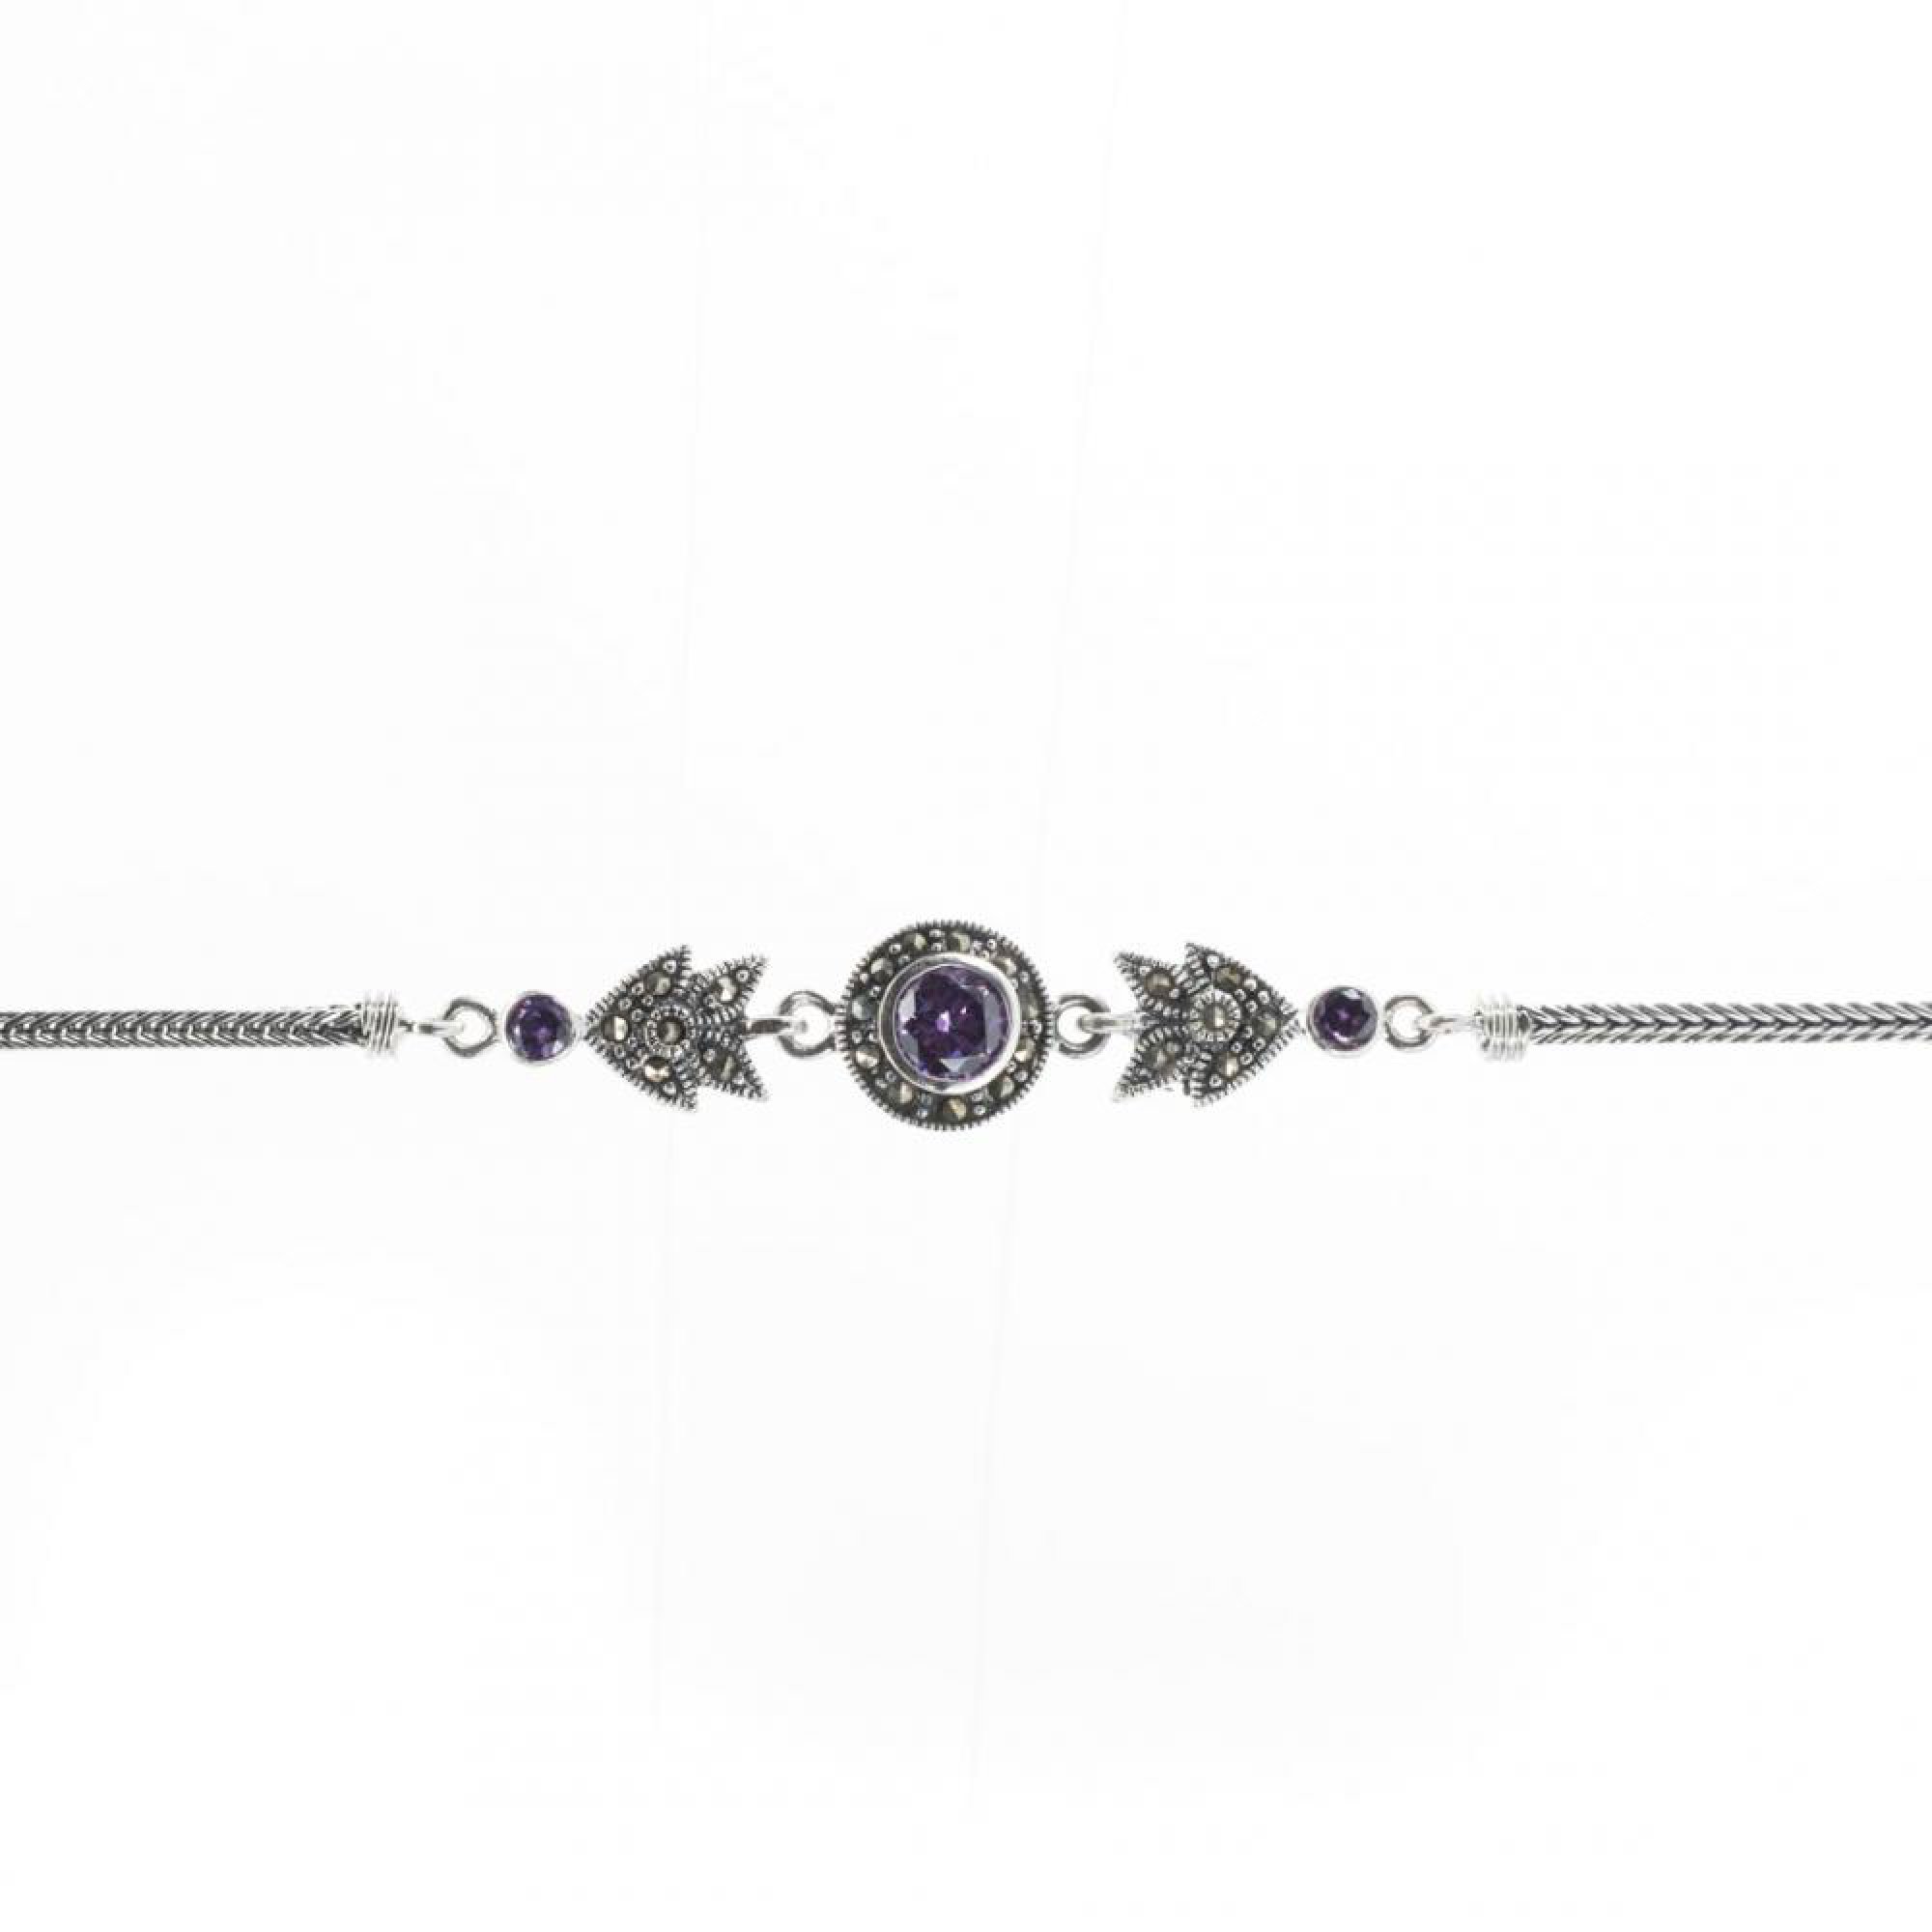 Bracelet with marcasites and amethyst stones